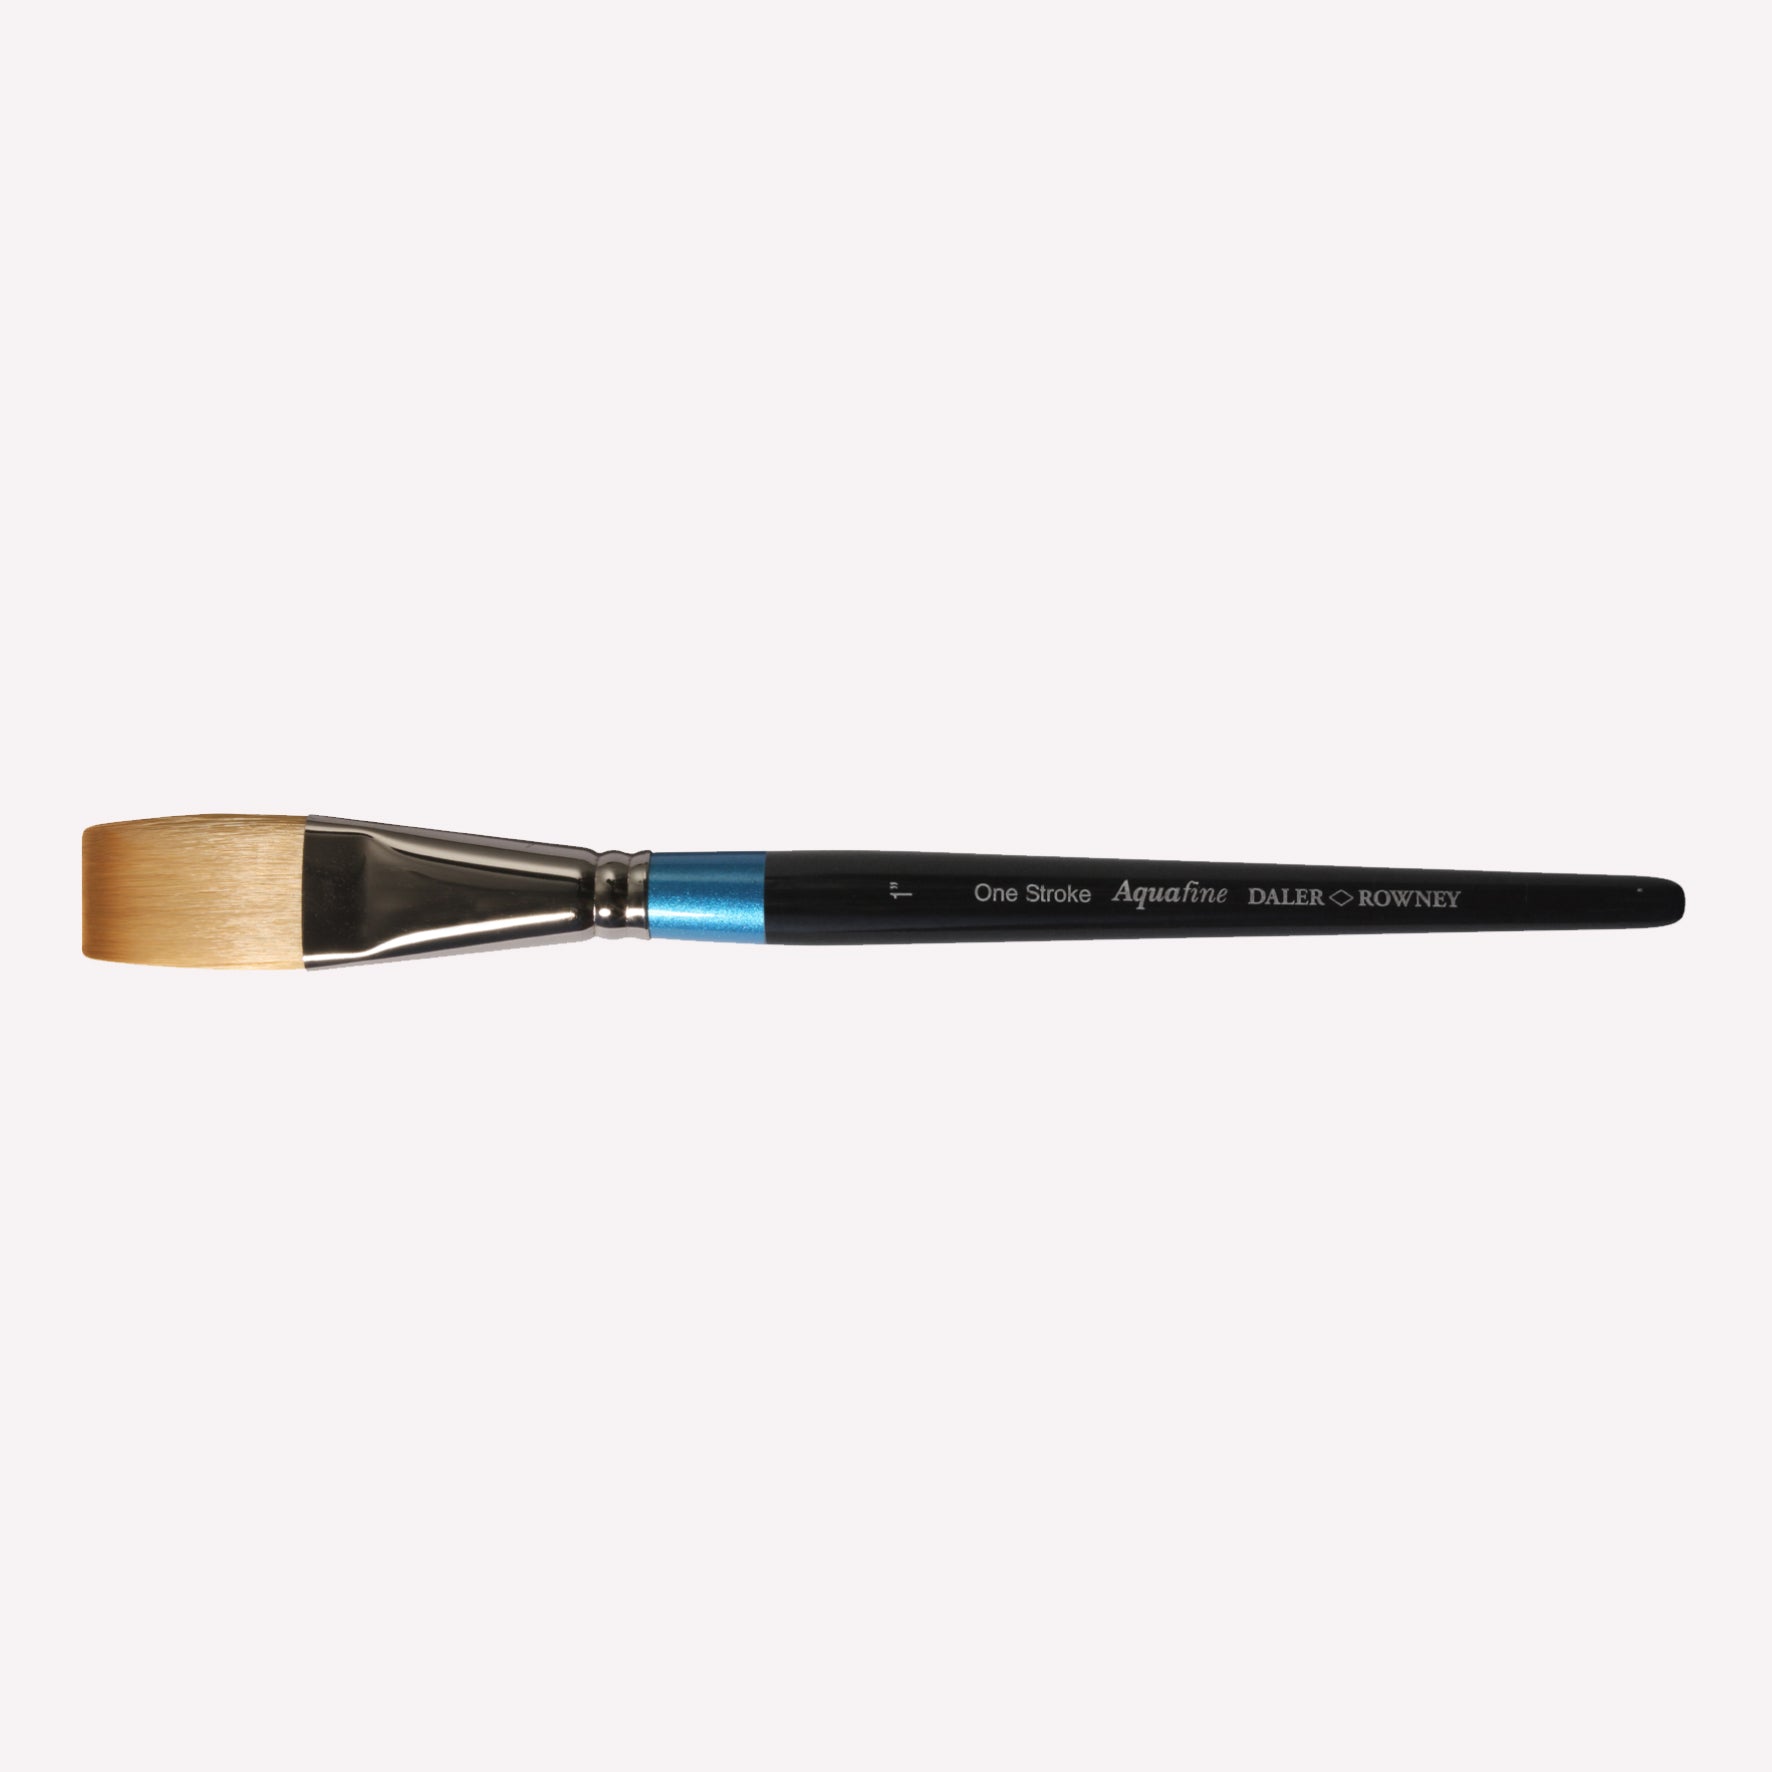 Daler Rowney Aquafine Short Flat Paintbrush in size 1”. This flat, square-shaped brush is ideal for layering colours or creating seamless gradient washes. Brushes have a classy black handle with blue detailing and a silver ferrule.